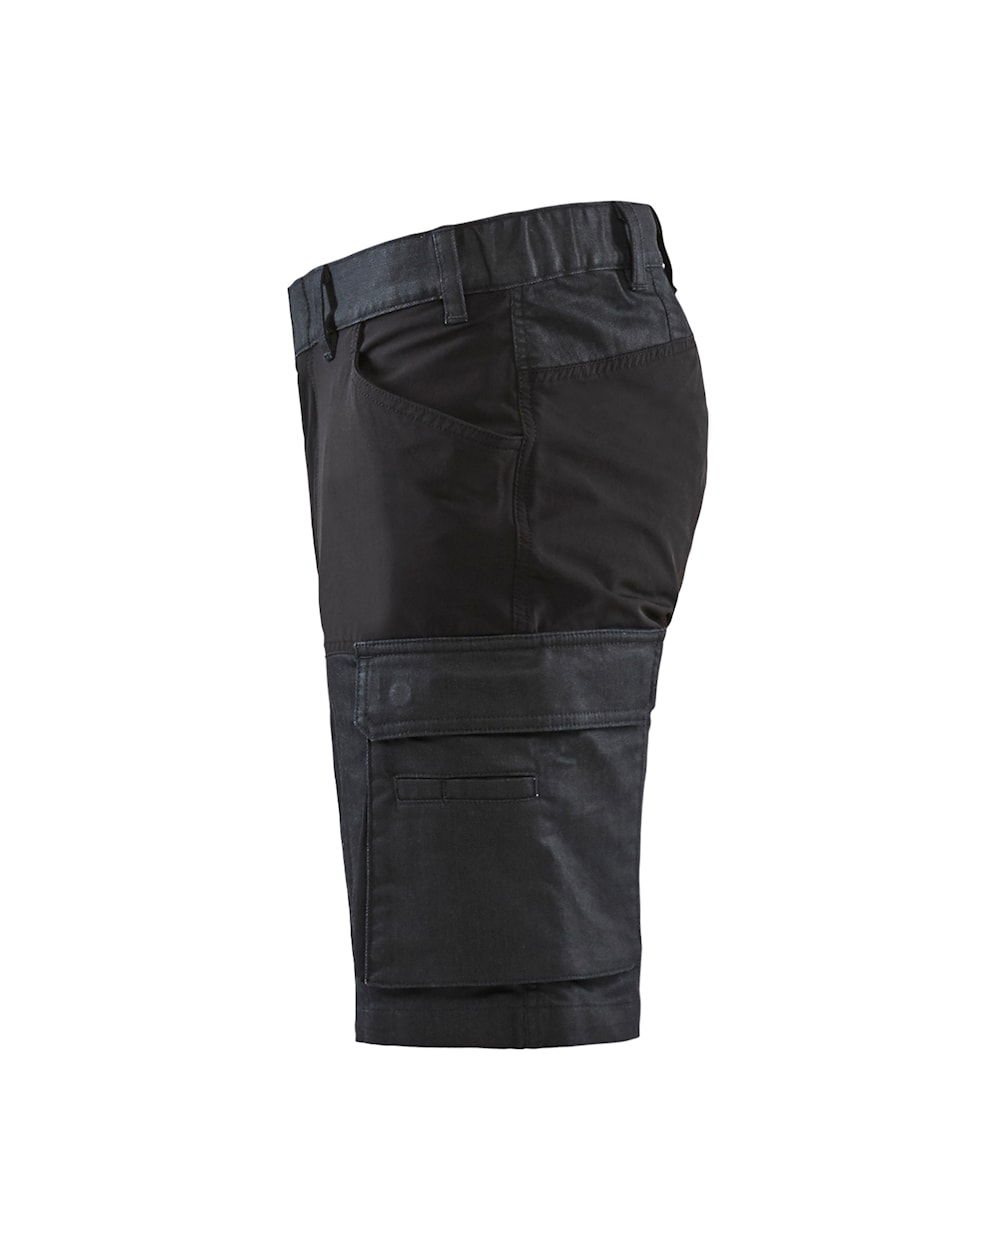 Blaklader Service Shorts with Stretch 1437 #colour_navy-blue-black